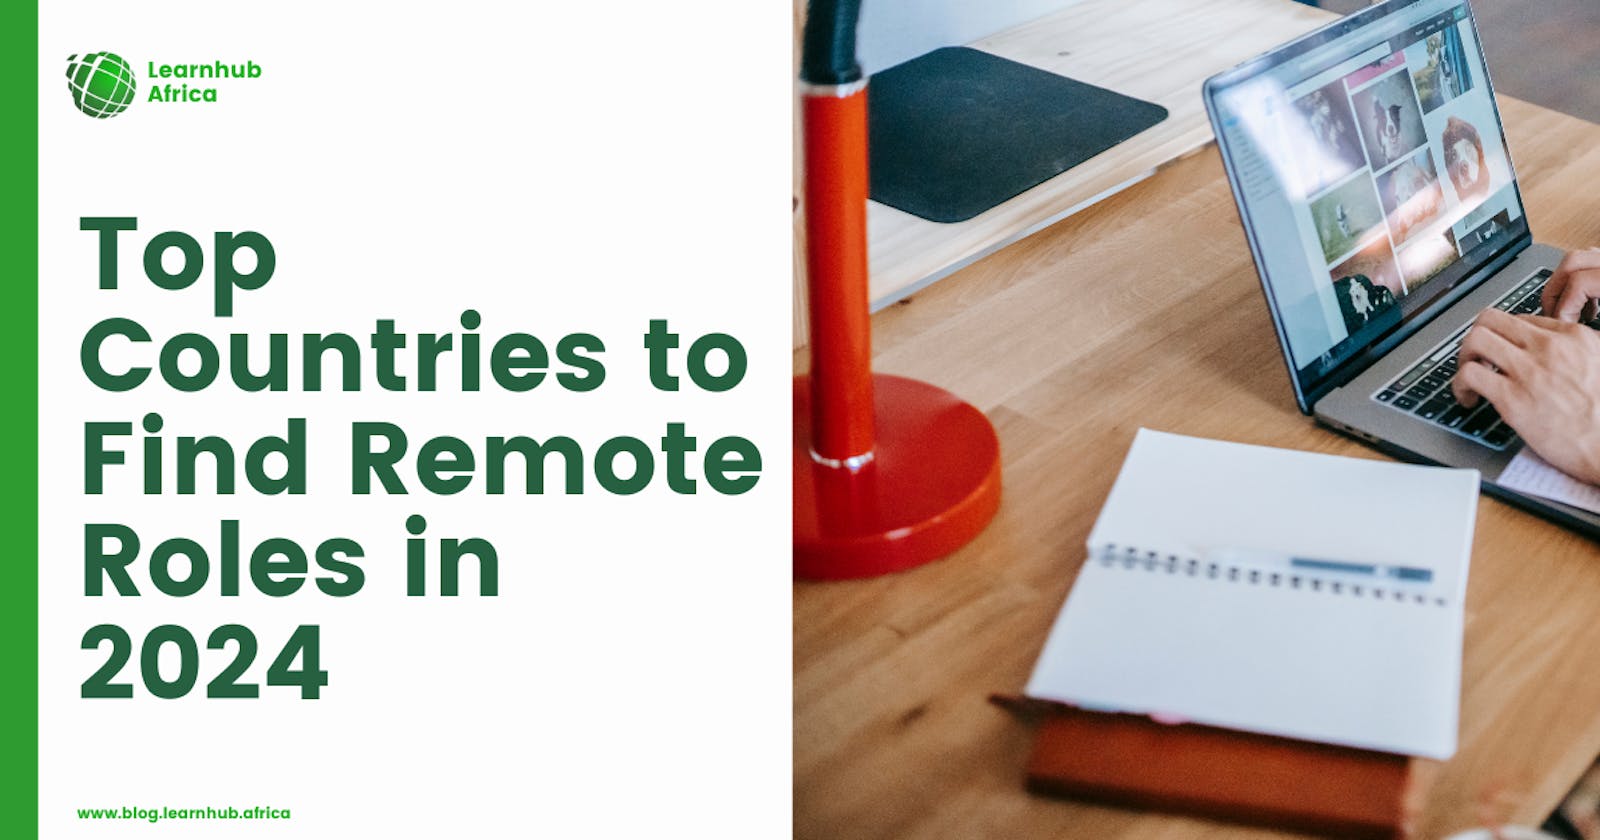 Top Countries to Find Remote Roles in 2024